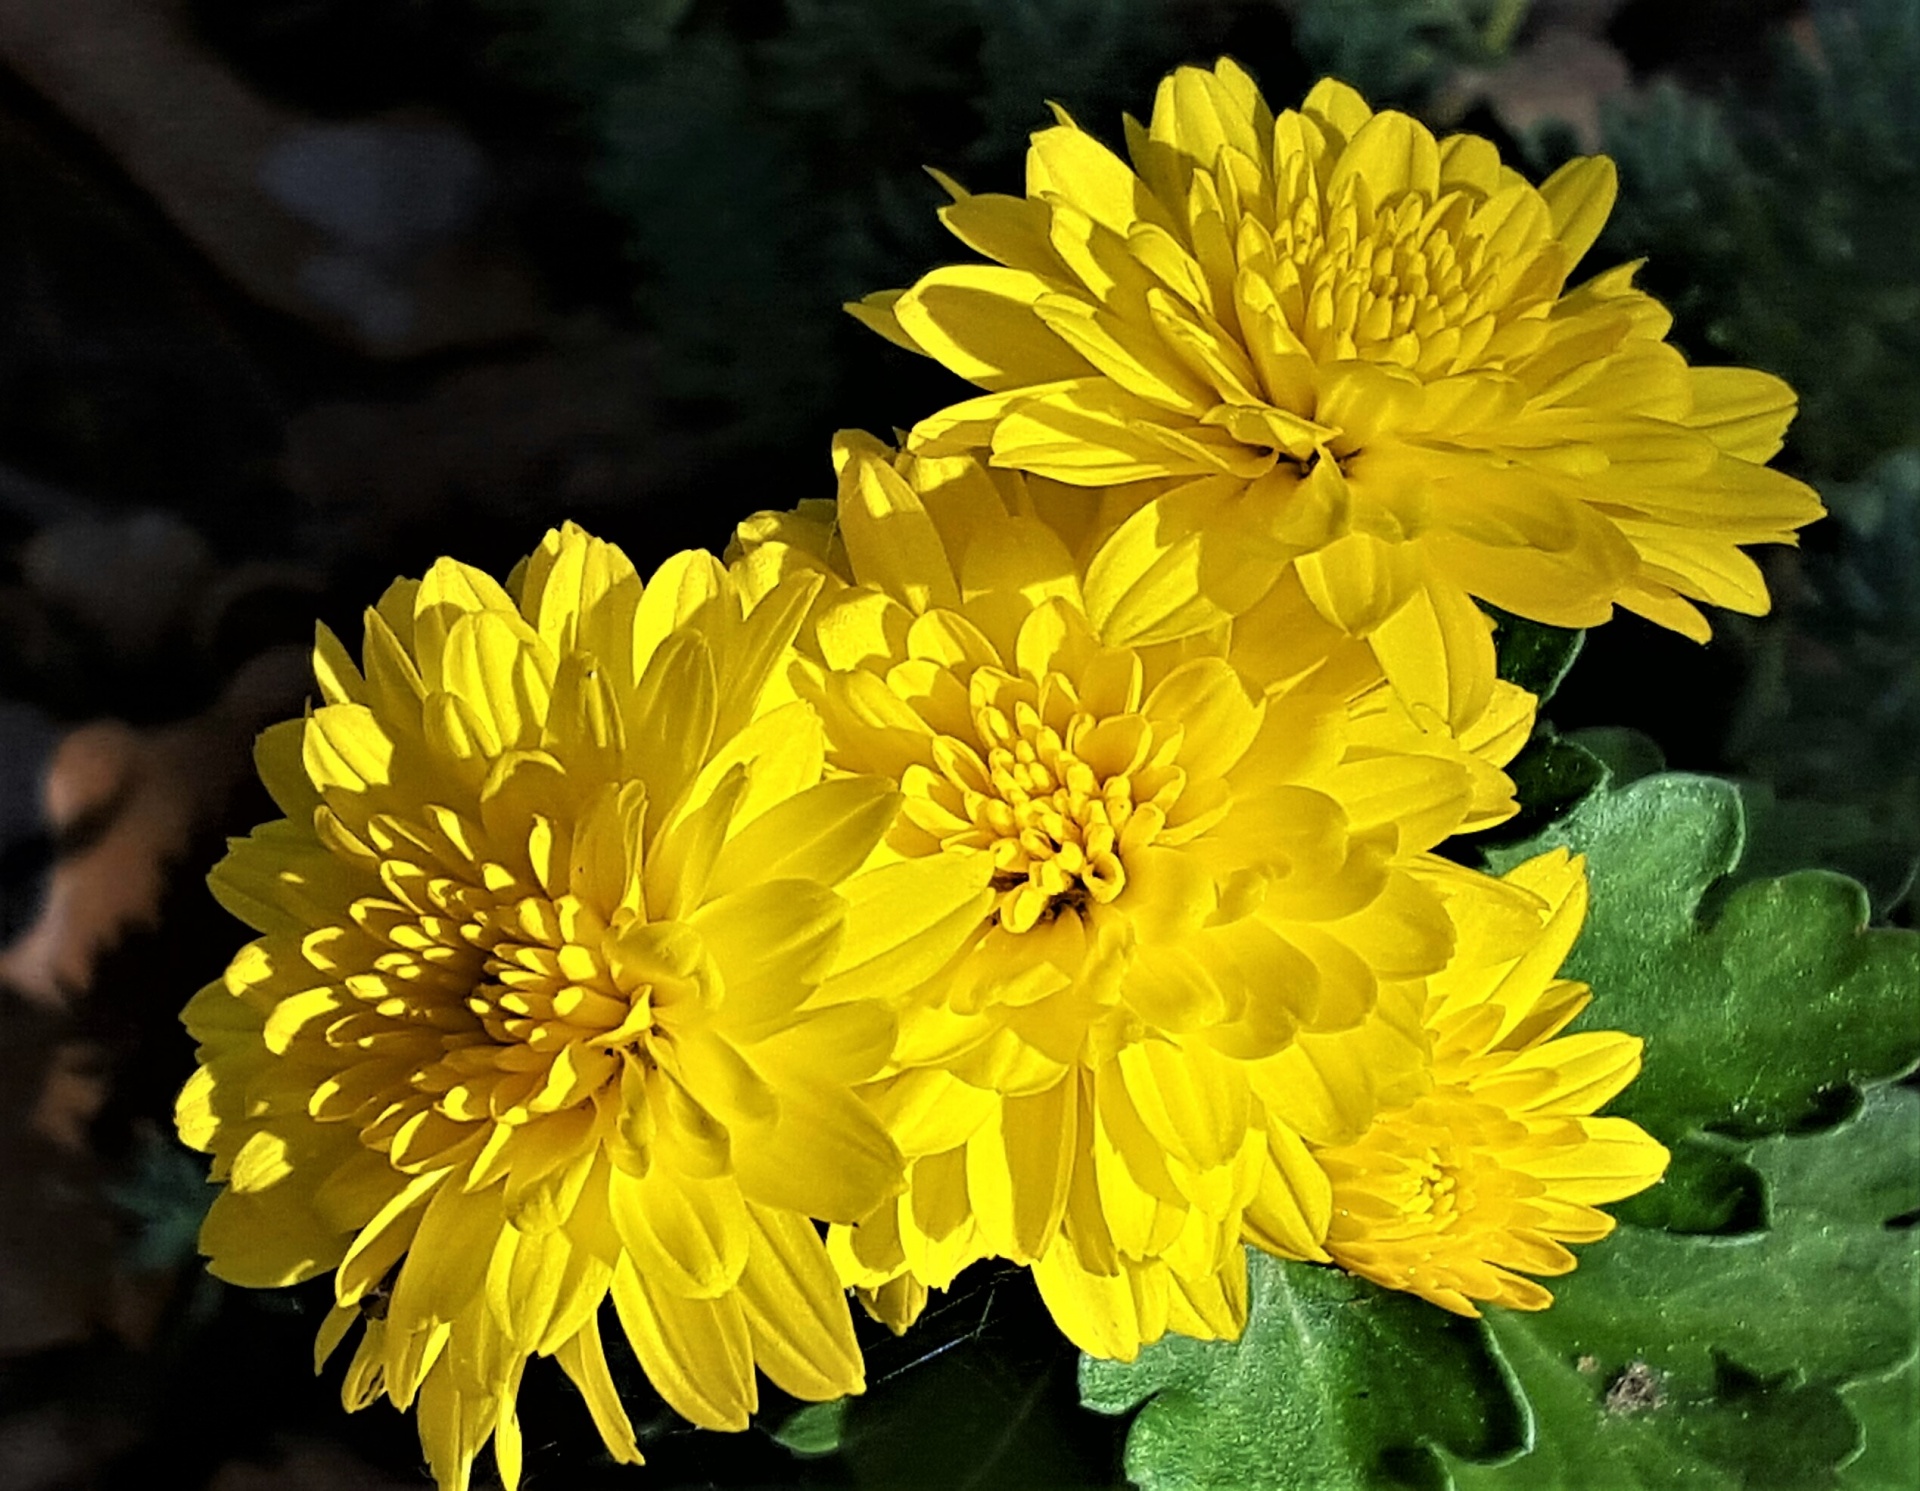 A group of yellow chrysanthemum flowers, with highlights and shadows on a black background.